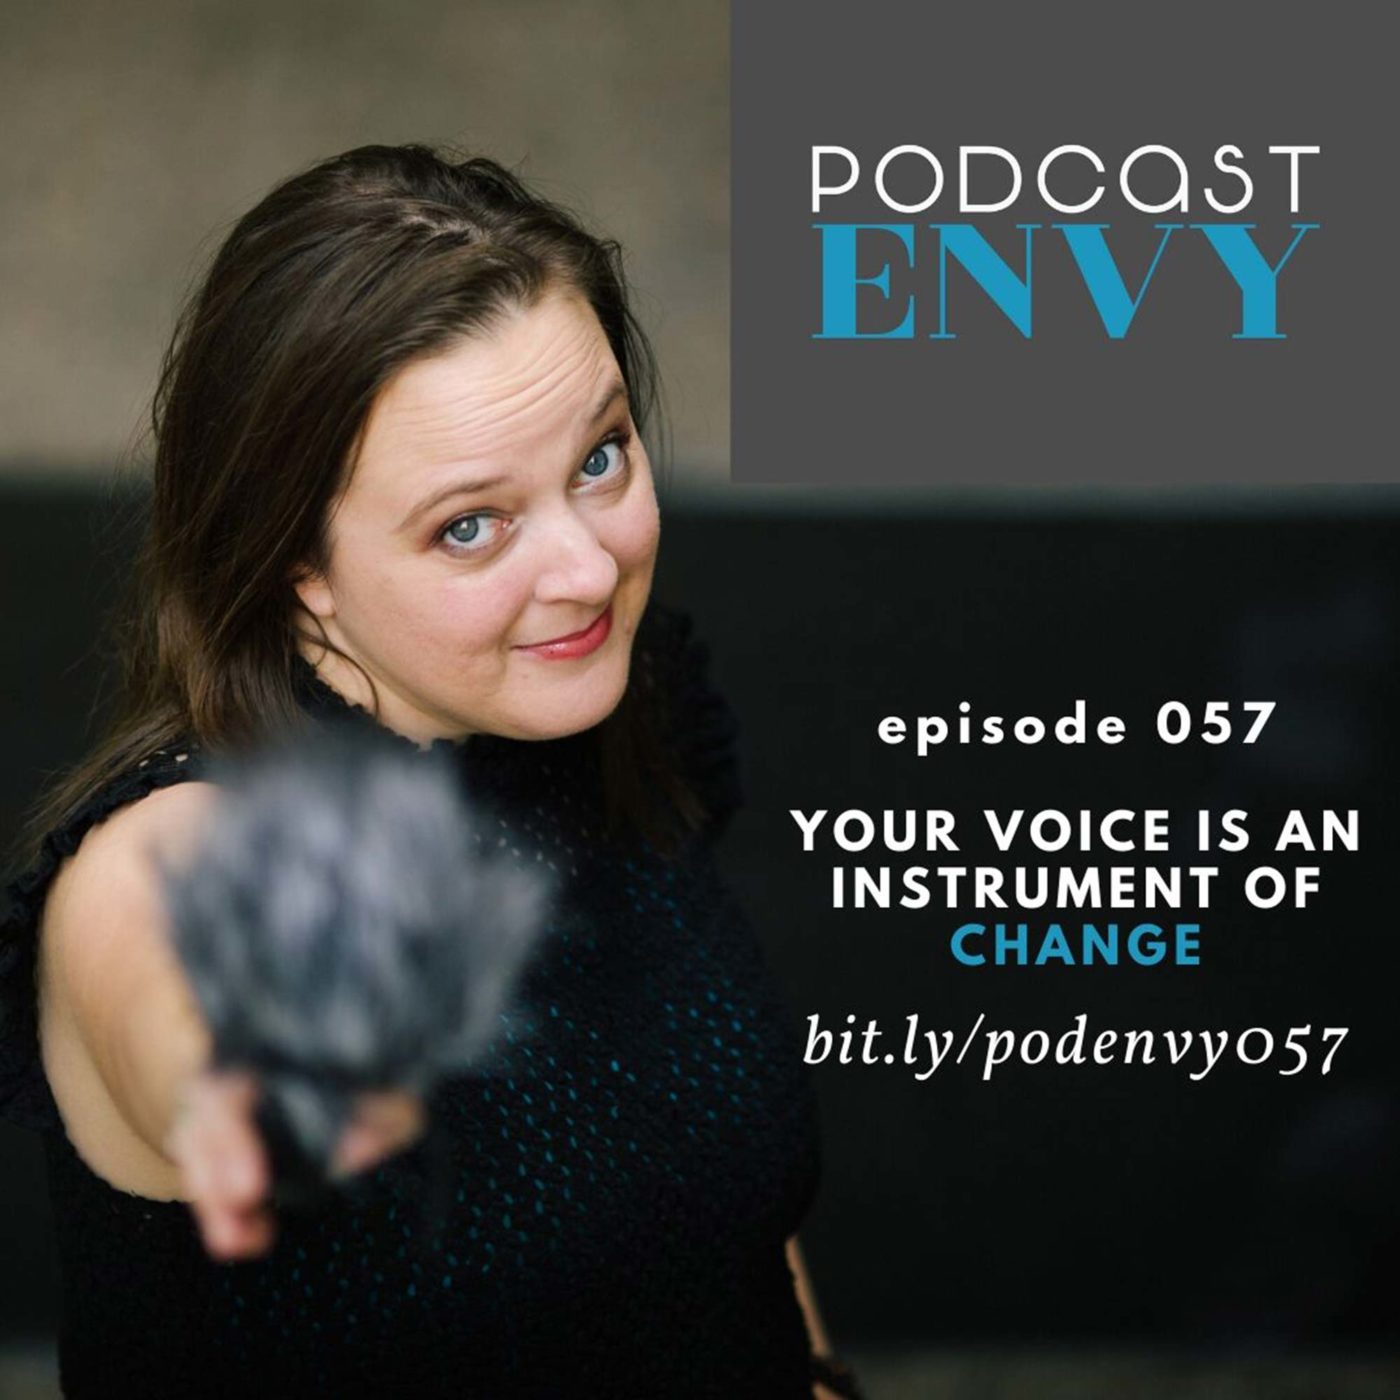 PE057: Your voice is an instrument of change (launch your show now)